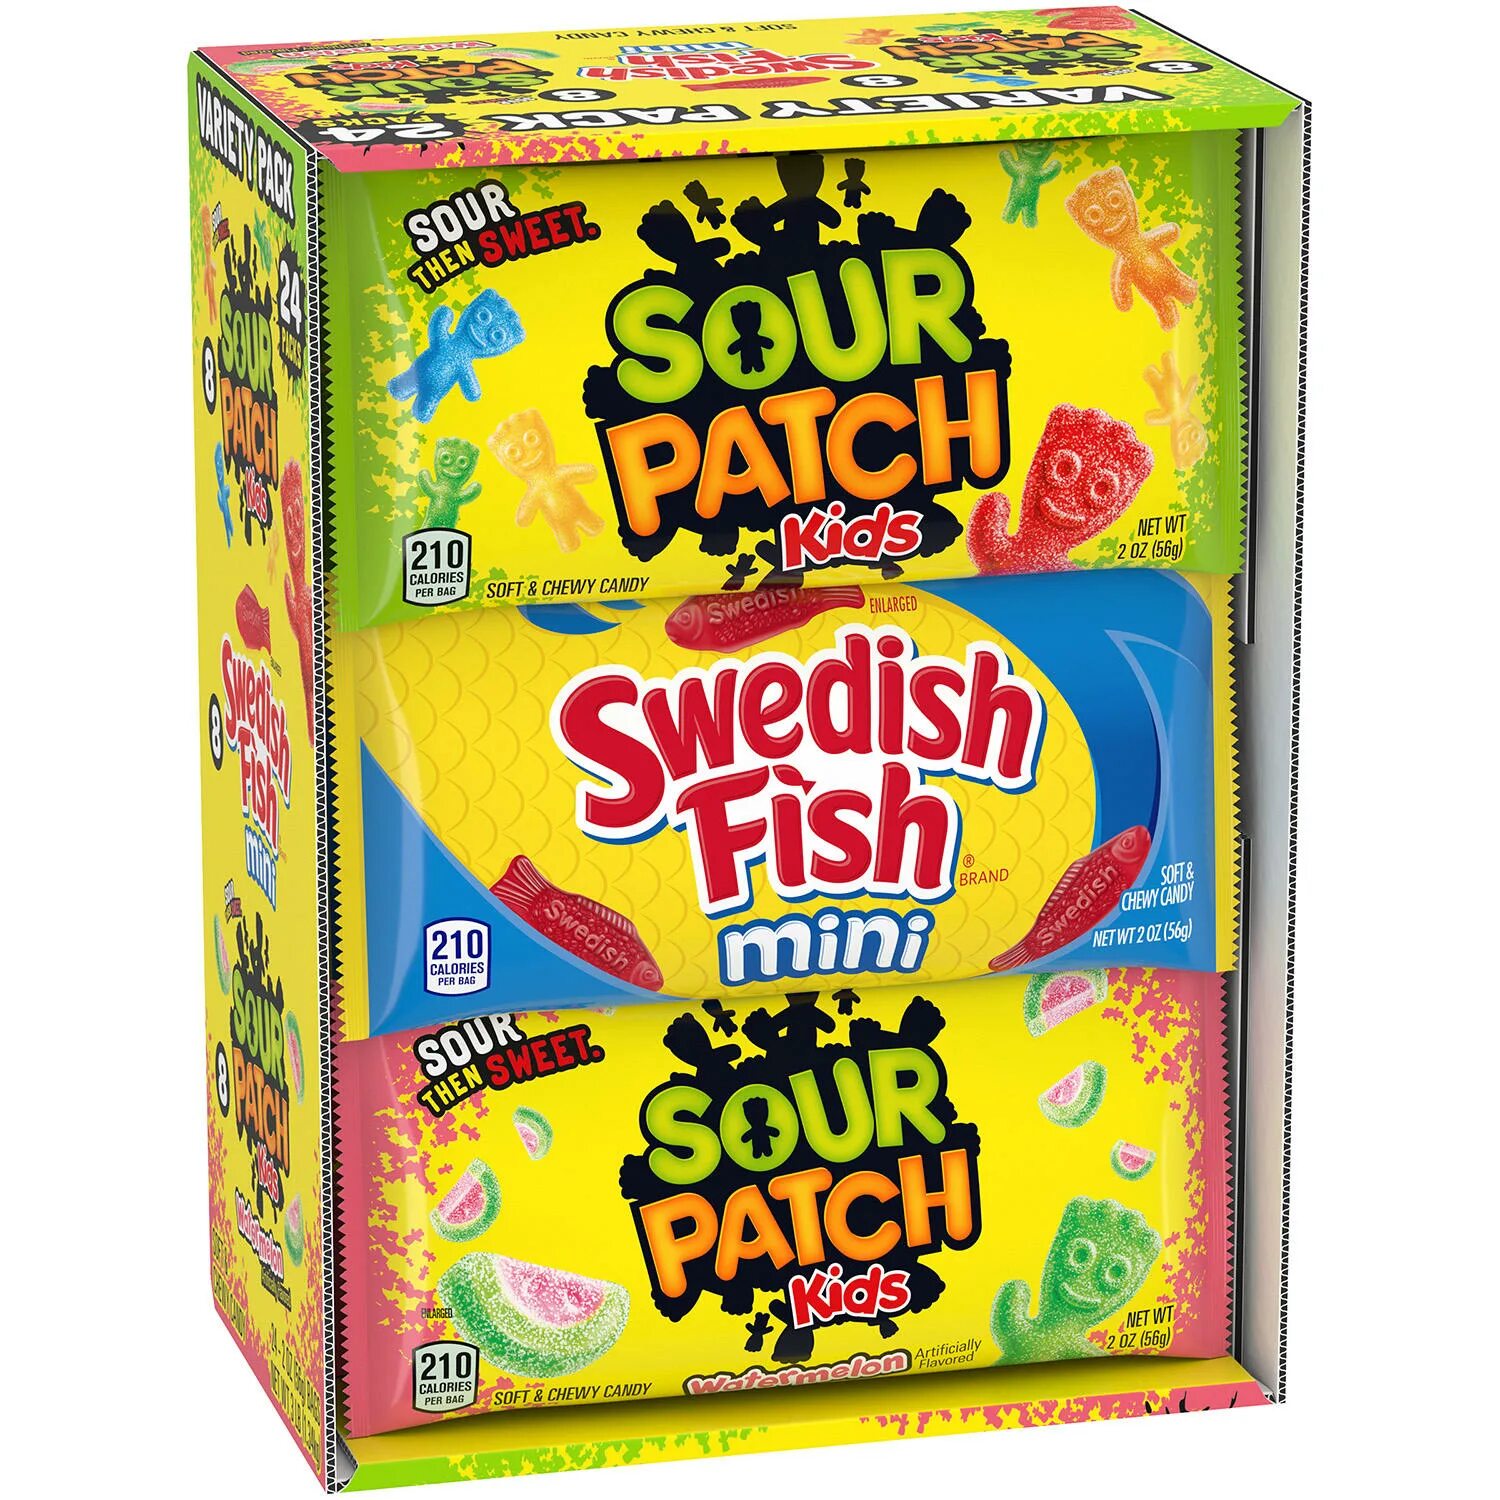 Конфеты Sour Patch. Sour Patch Soft and Chewy Candy Kids. Sour Patch мармелад. Sour patch kids